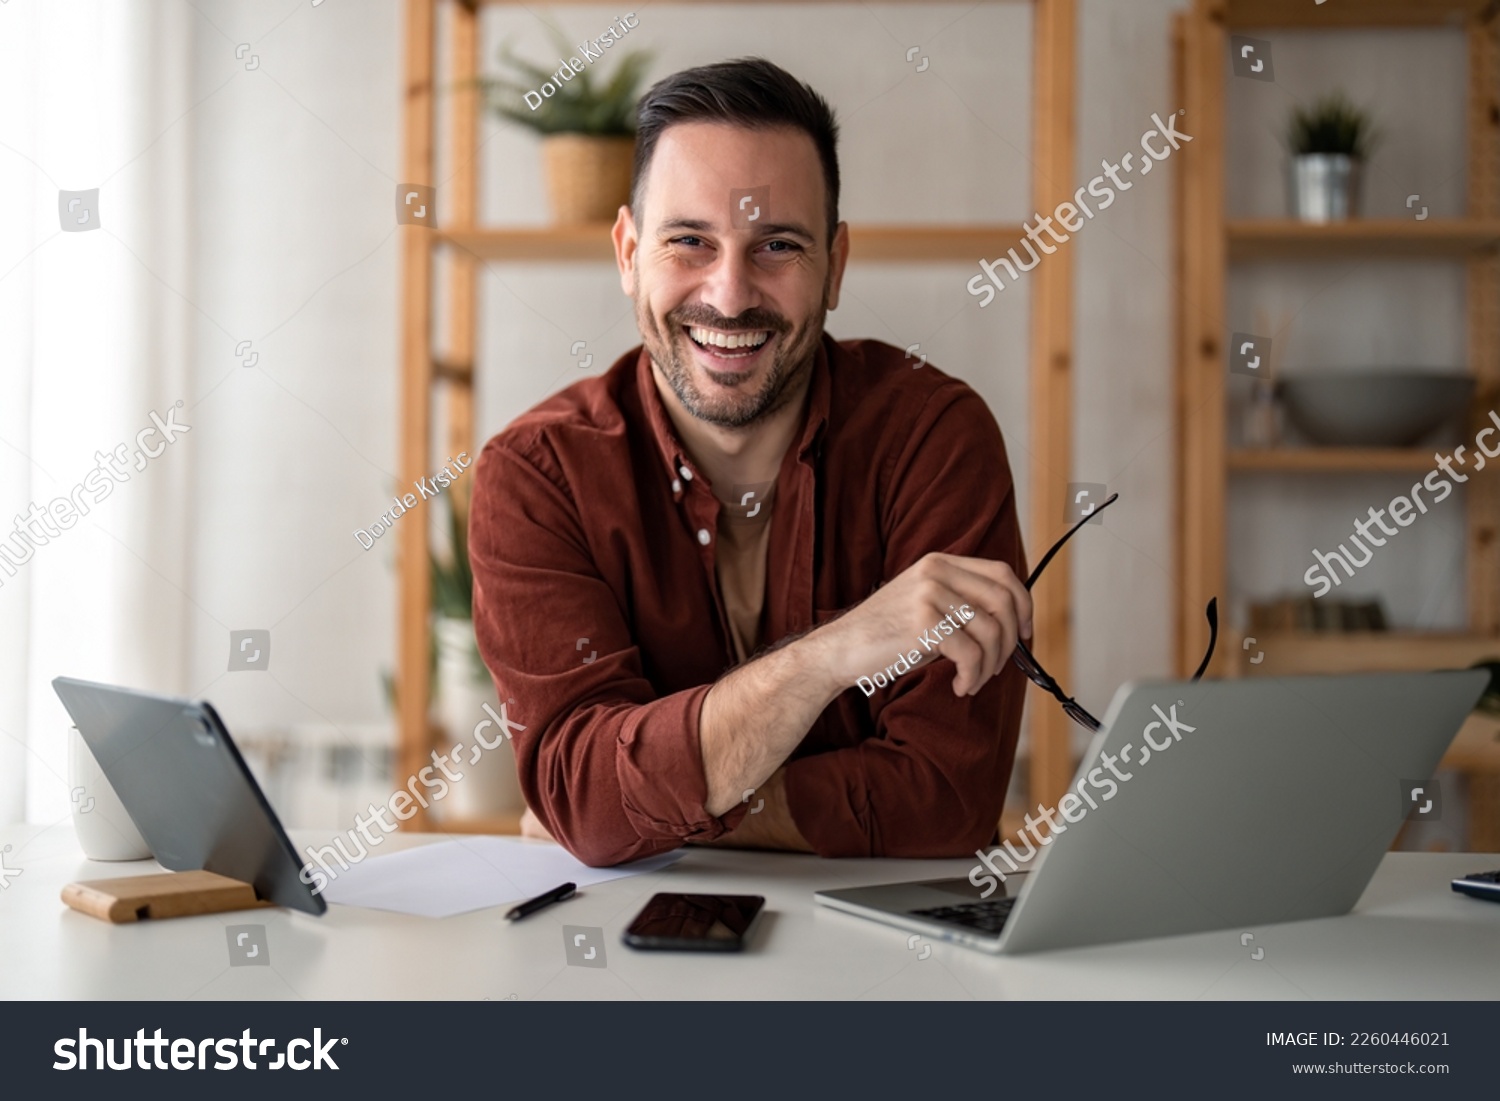 Smiling confident businessman looking at camera sitting at home office desk. Modern stylish corporate leader, successful manager or small business owner holding glasses posing for business portrait. #2260446021